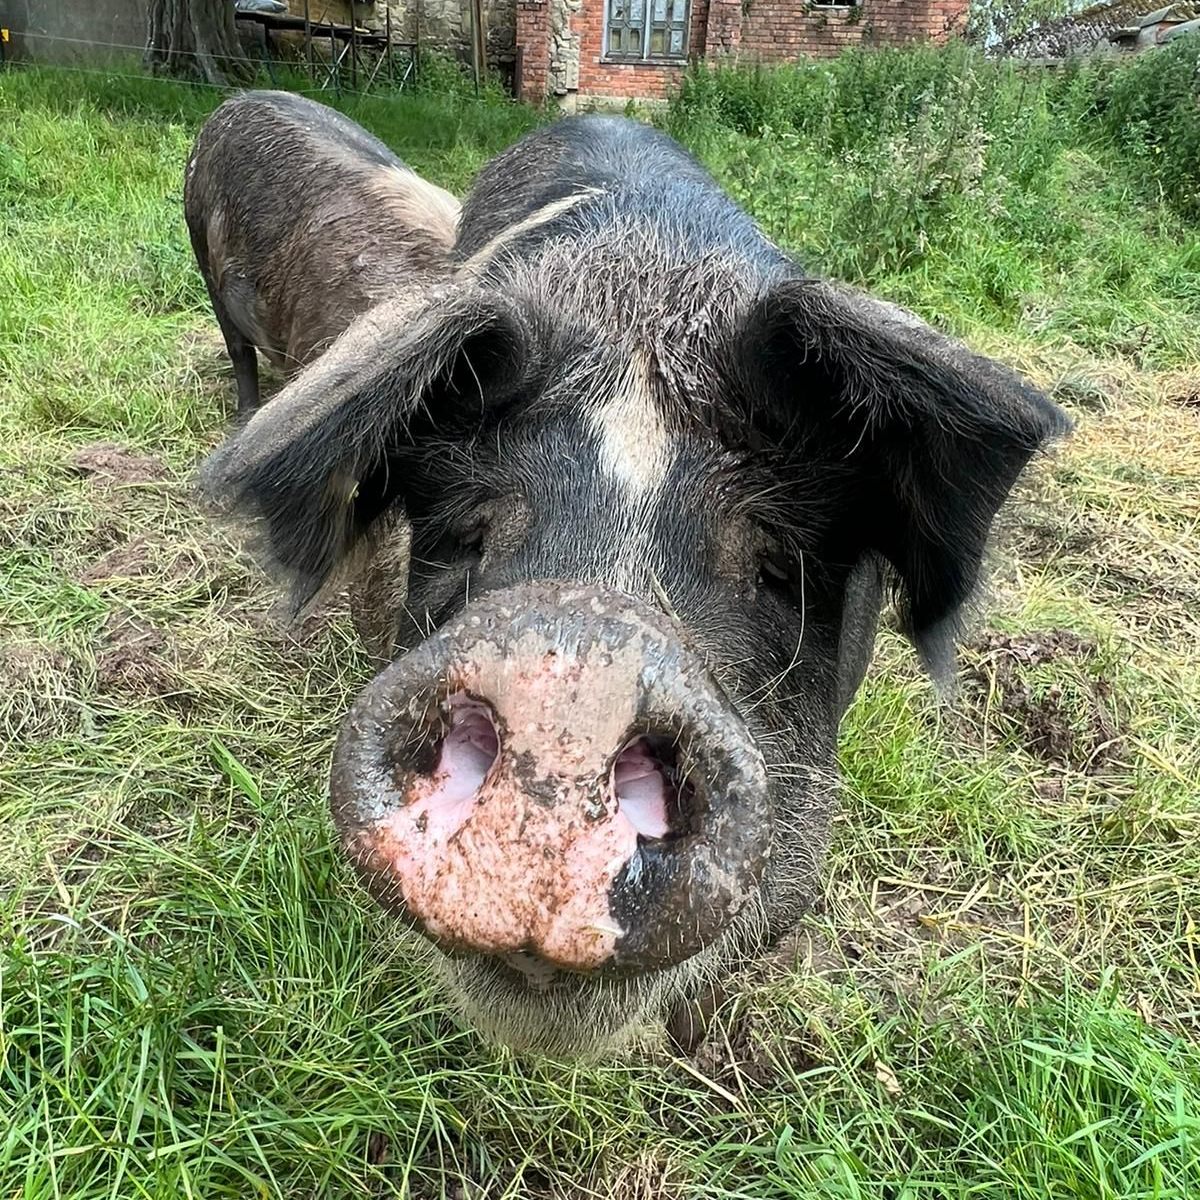 Ellesmere's Oteley Estate will be opening their gates on 9 June for a FREE Open Farm Sunday event. 🐖🐄 Plus, a garden open day is taking place this weekend (Sunday 5 May) from 11am to 4pm. 🌸 Read more here 👉 tinyurl.com/4ezsz5j9